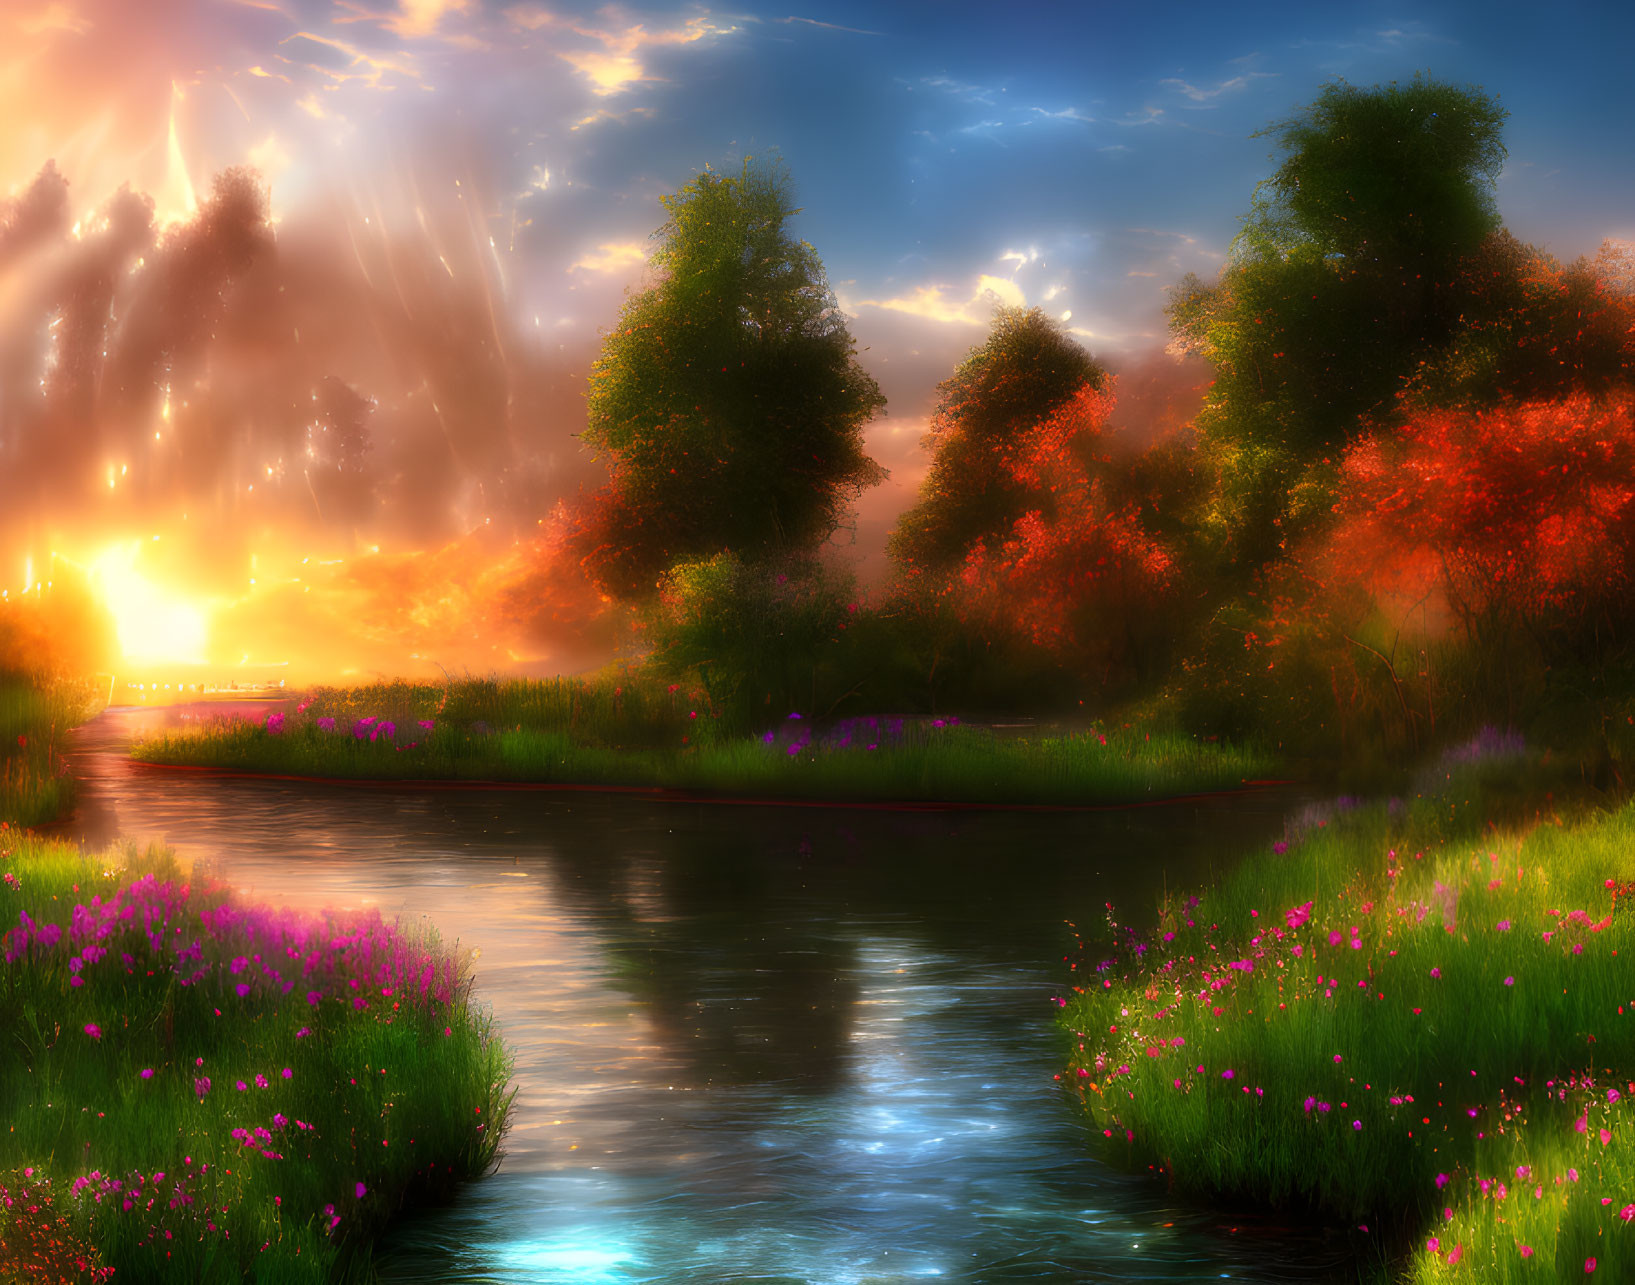 Serene river sunset with vibrant flowers, misty light rays, and autumn trees